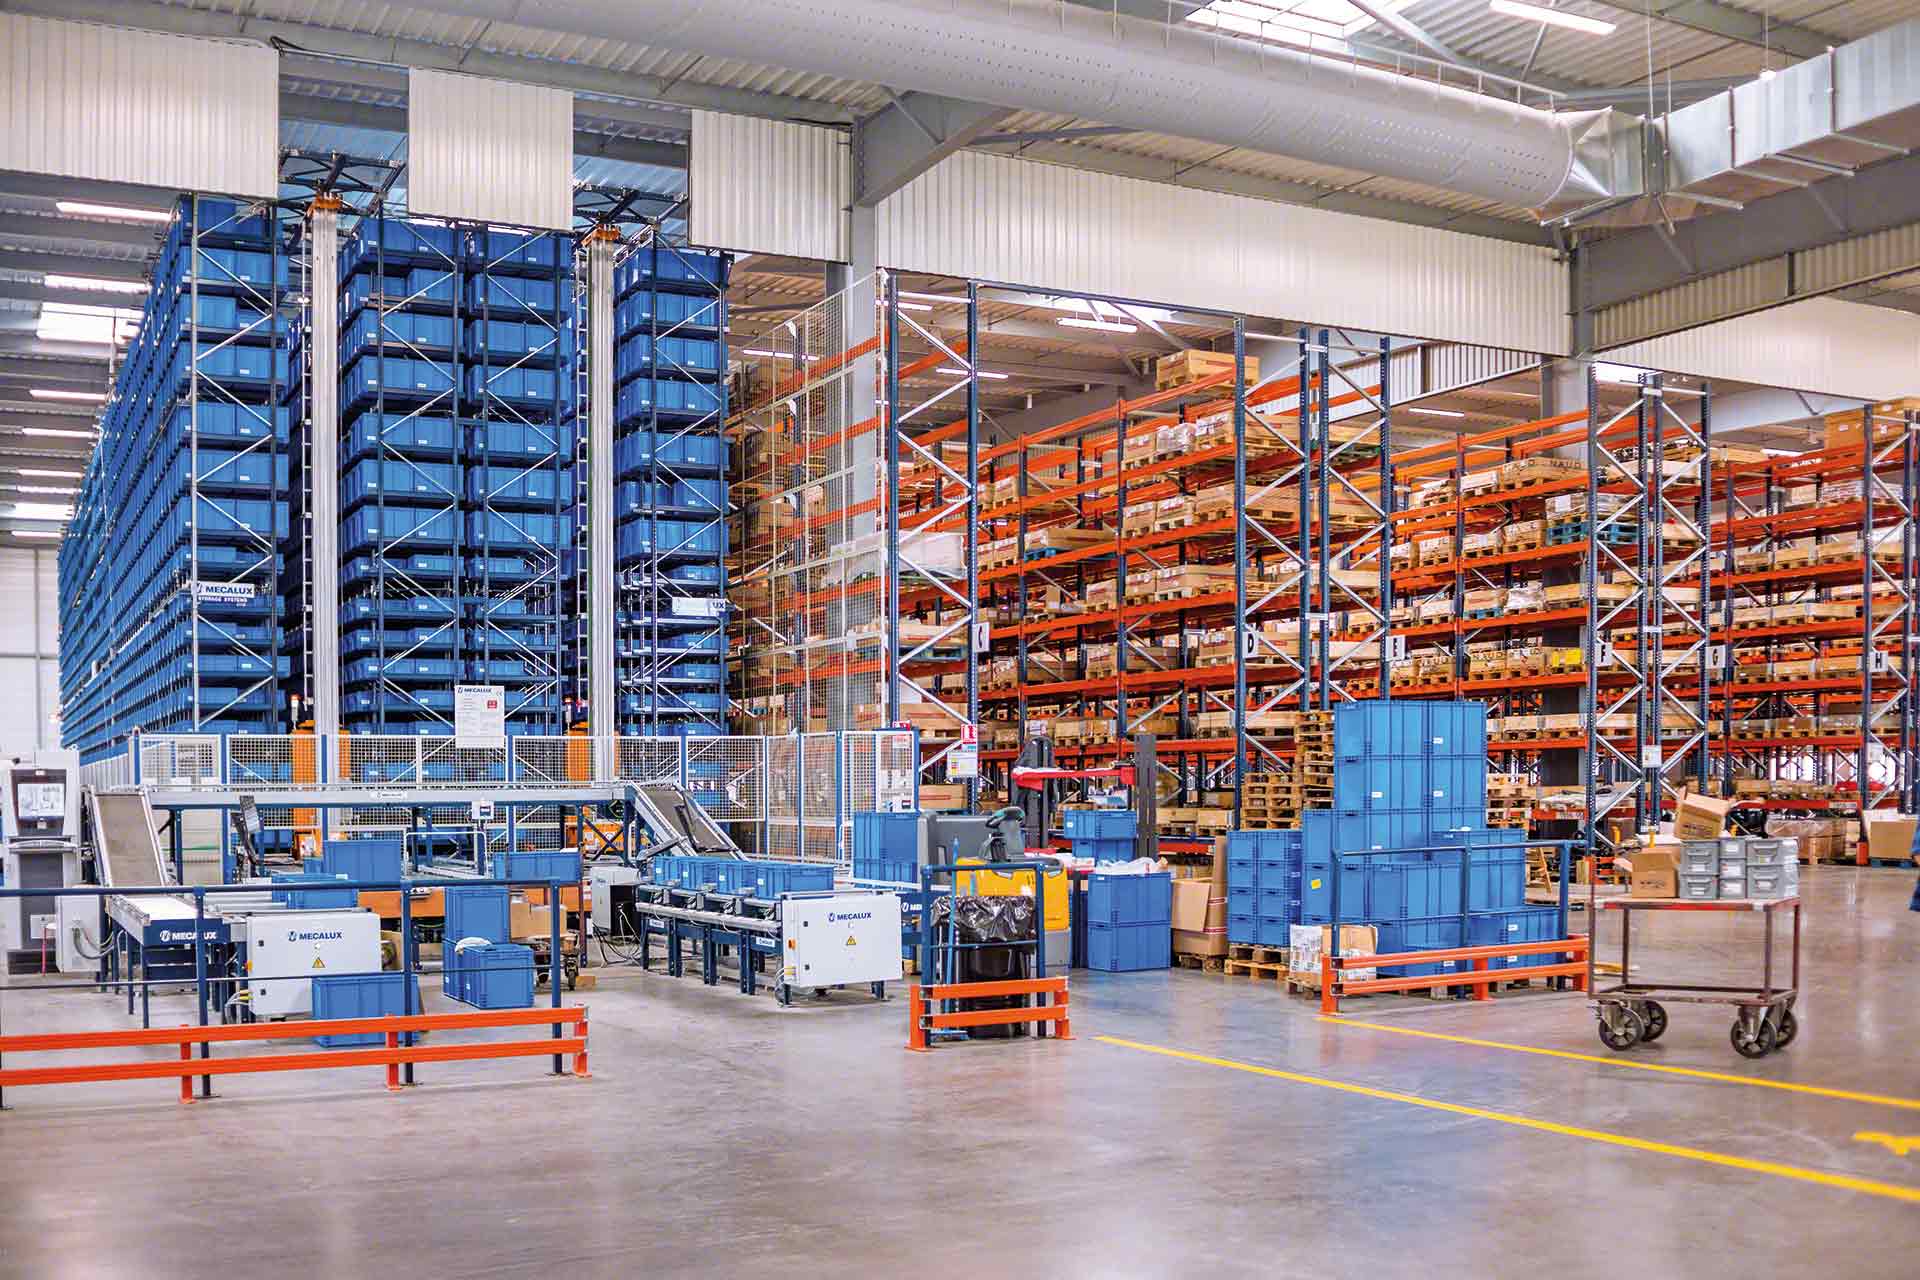 Manual & Automated Storage Systems Compared